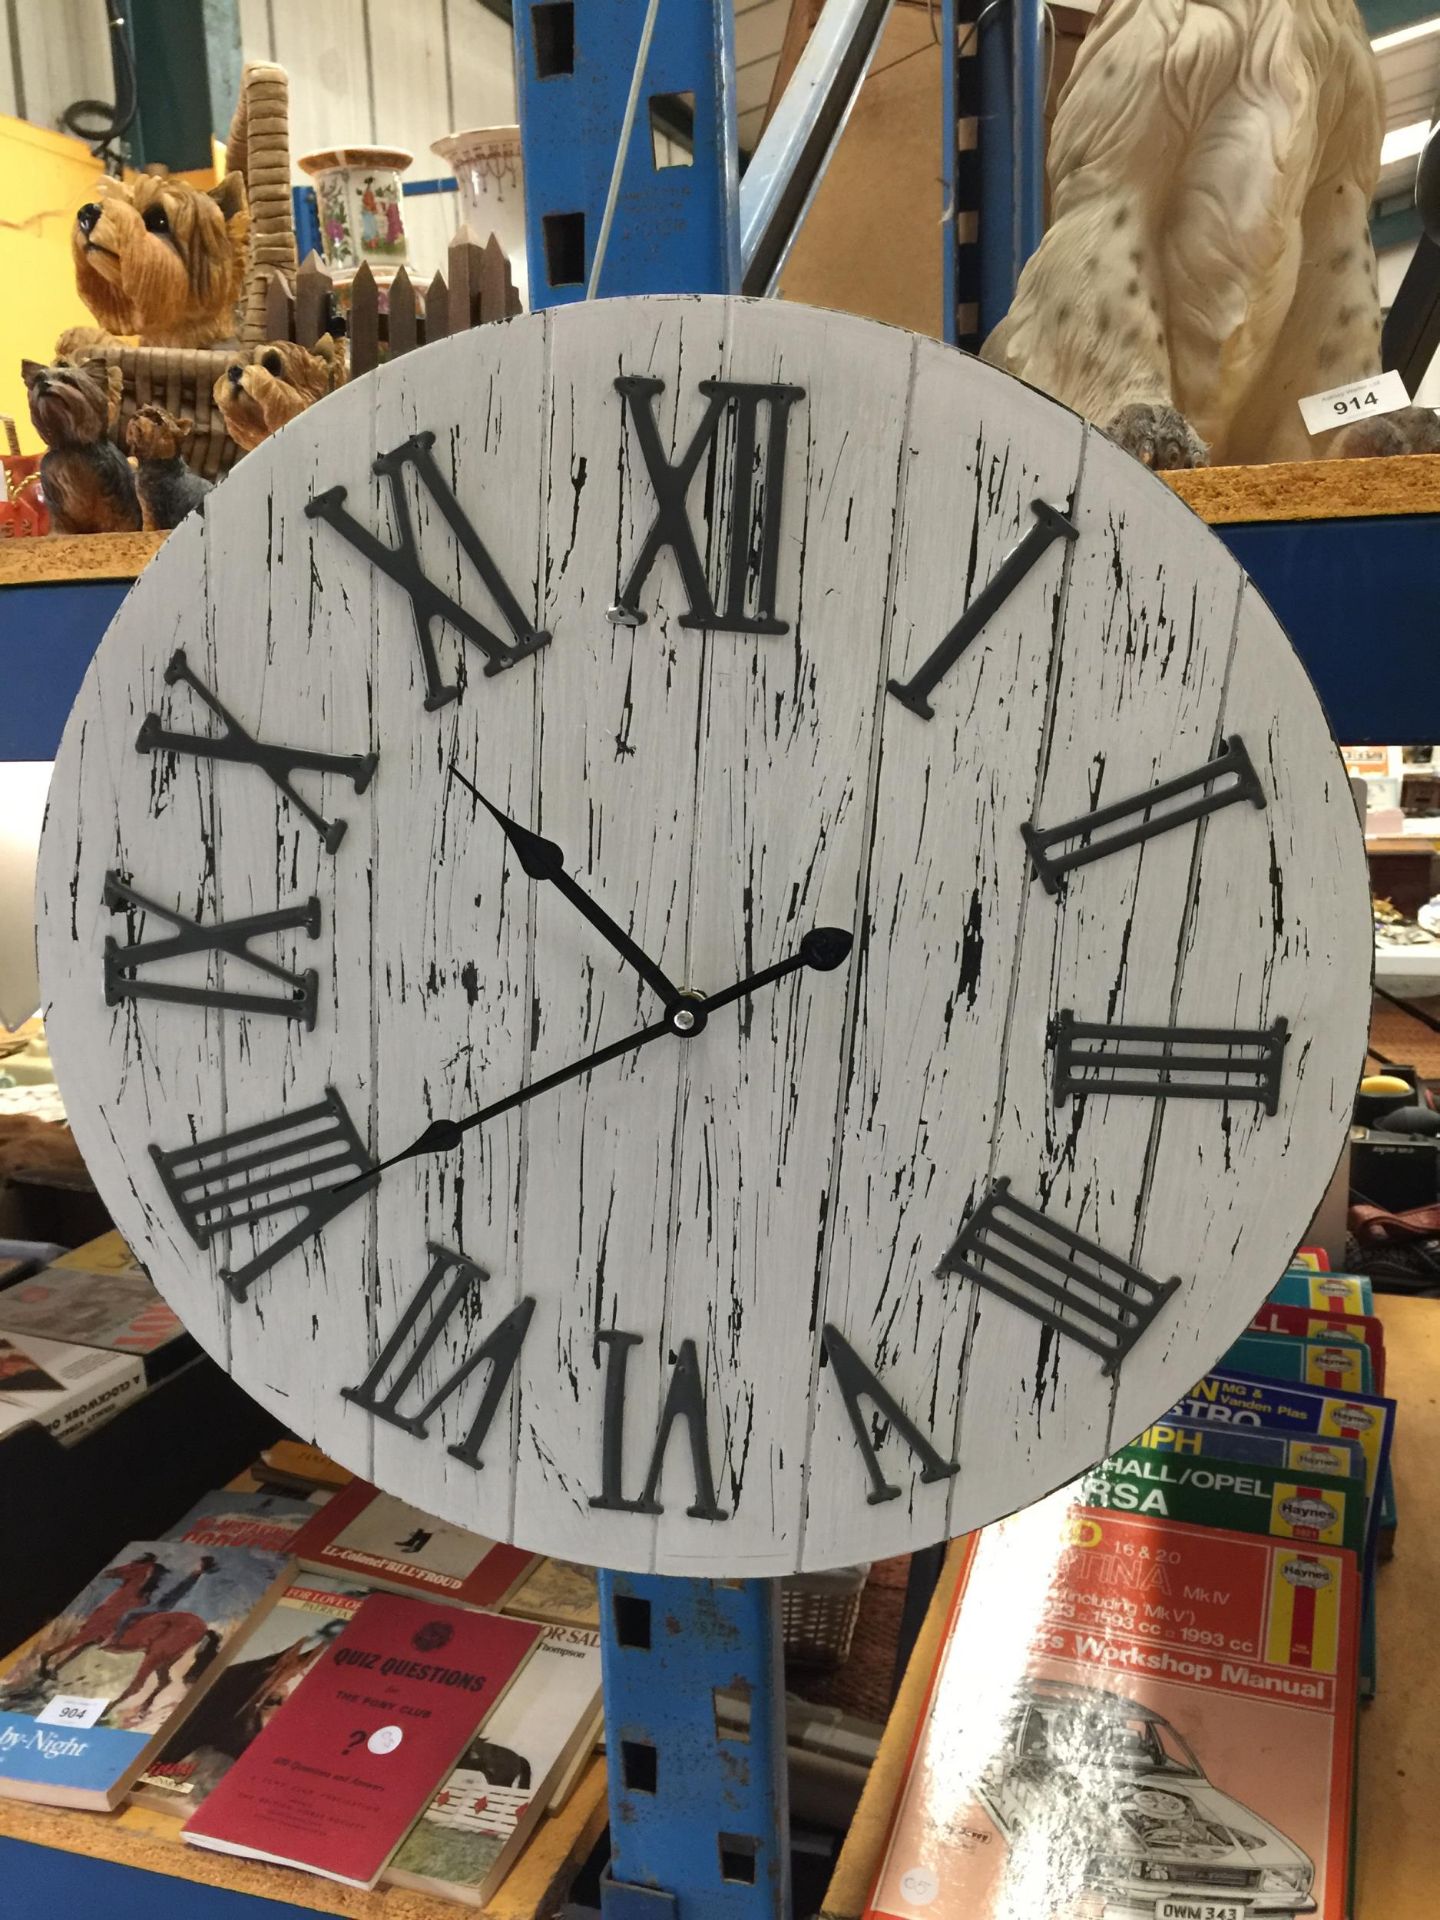 A VINTAGE STYLE WOODEN WALL CLOCK